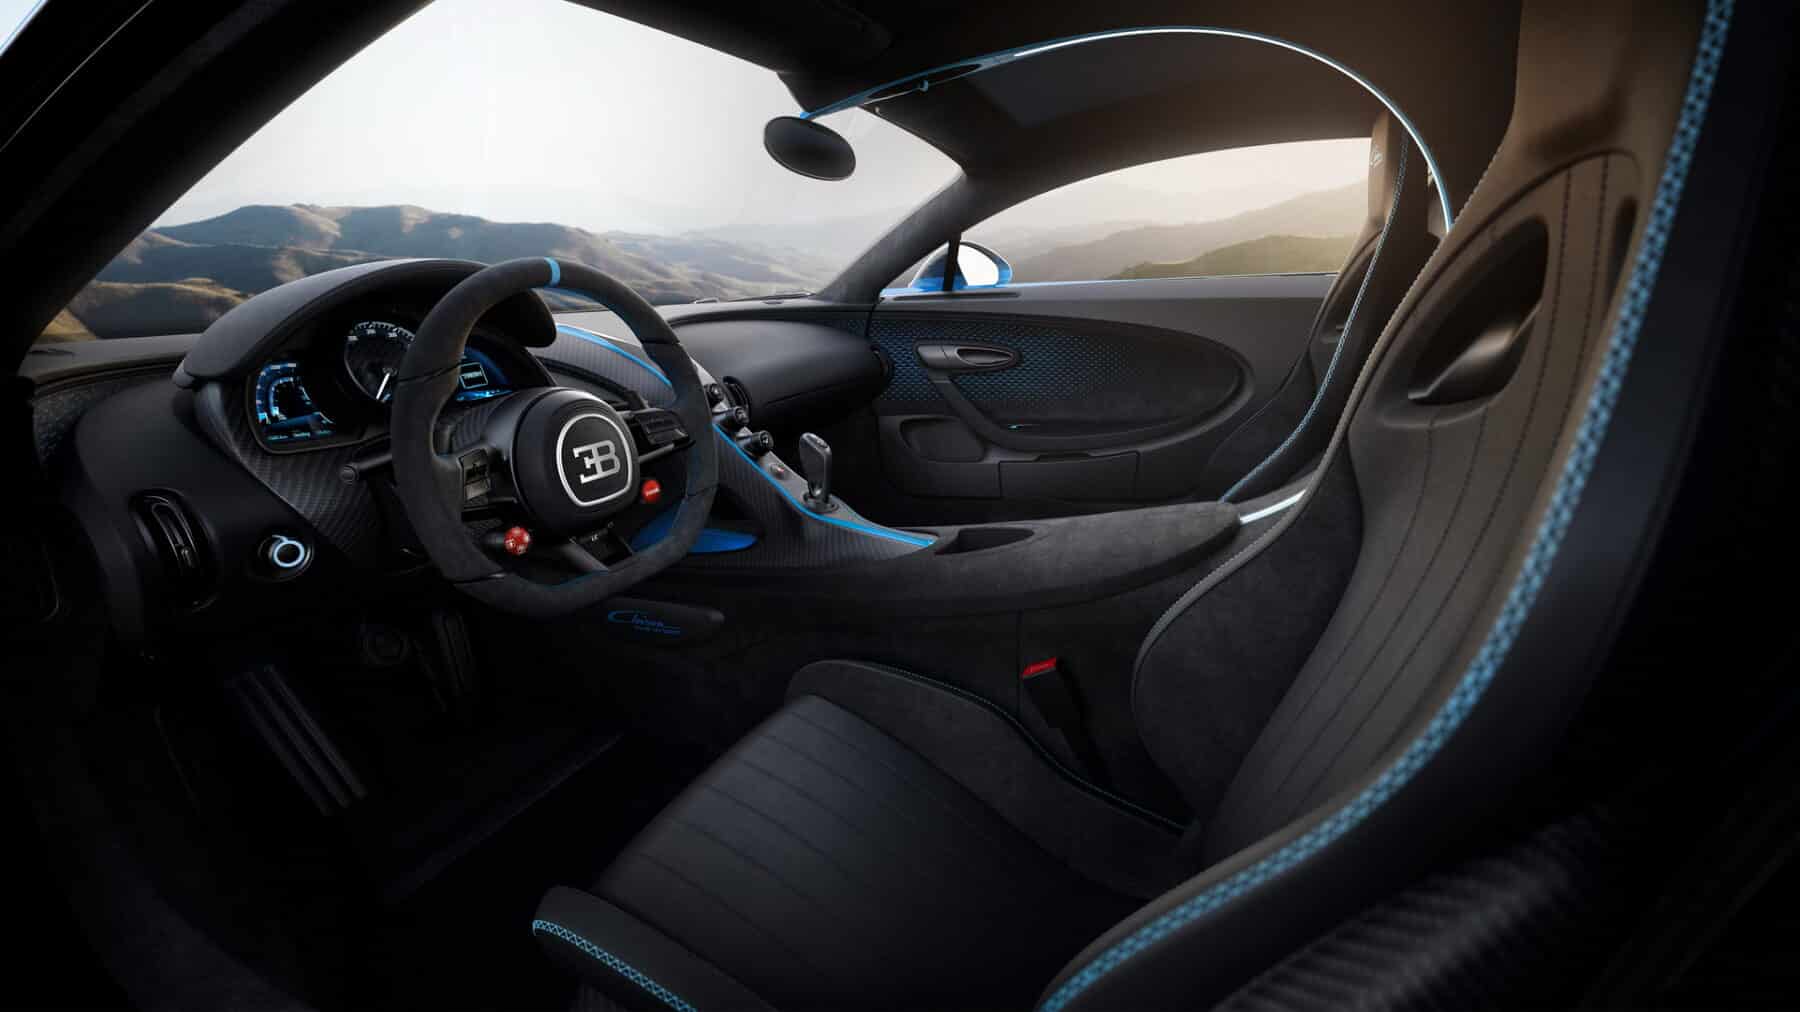 Heat ?, with the air conditioning of the Bugatti Chiron you could cool an 80 m² apartment